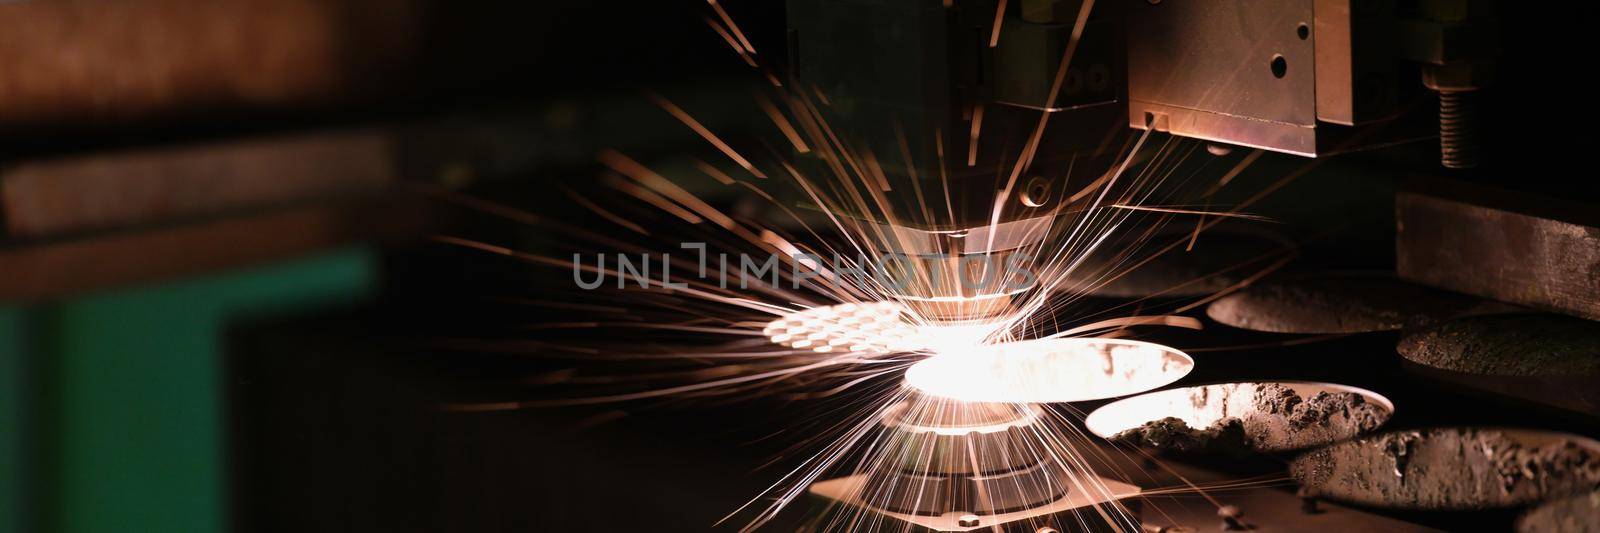 Sparks fly out machine head for metal processing laser metal by kuprevich